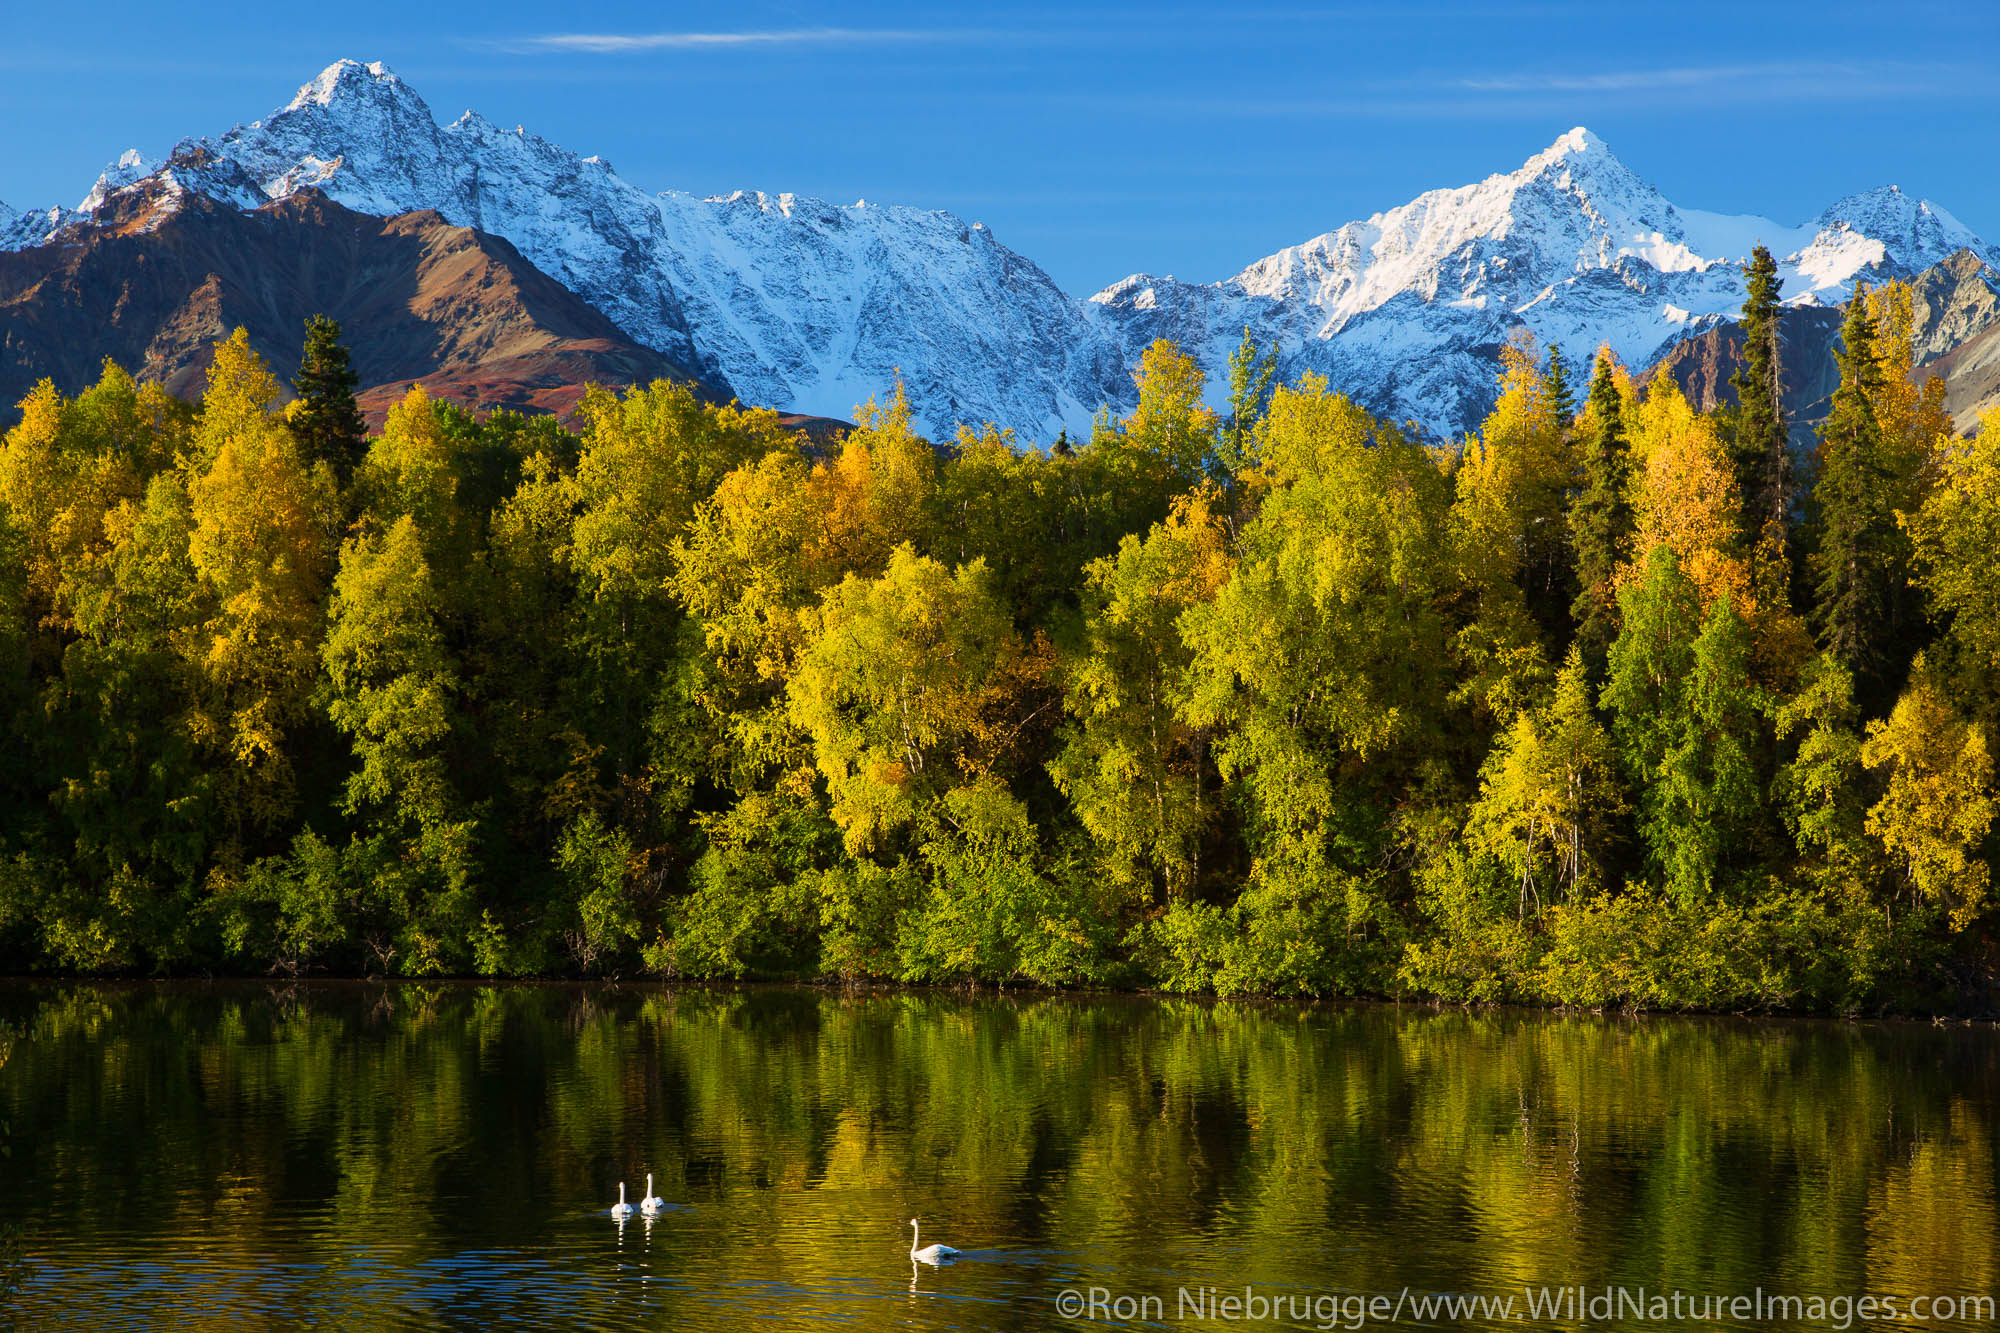 Swans stop for a rest on the fall migration south, Matanuska River Valley, Alaska.